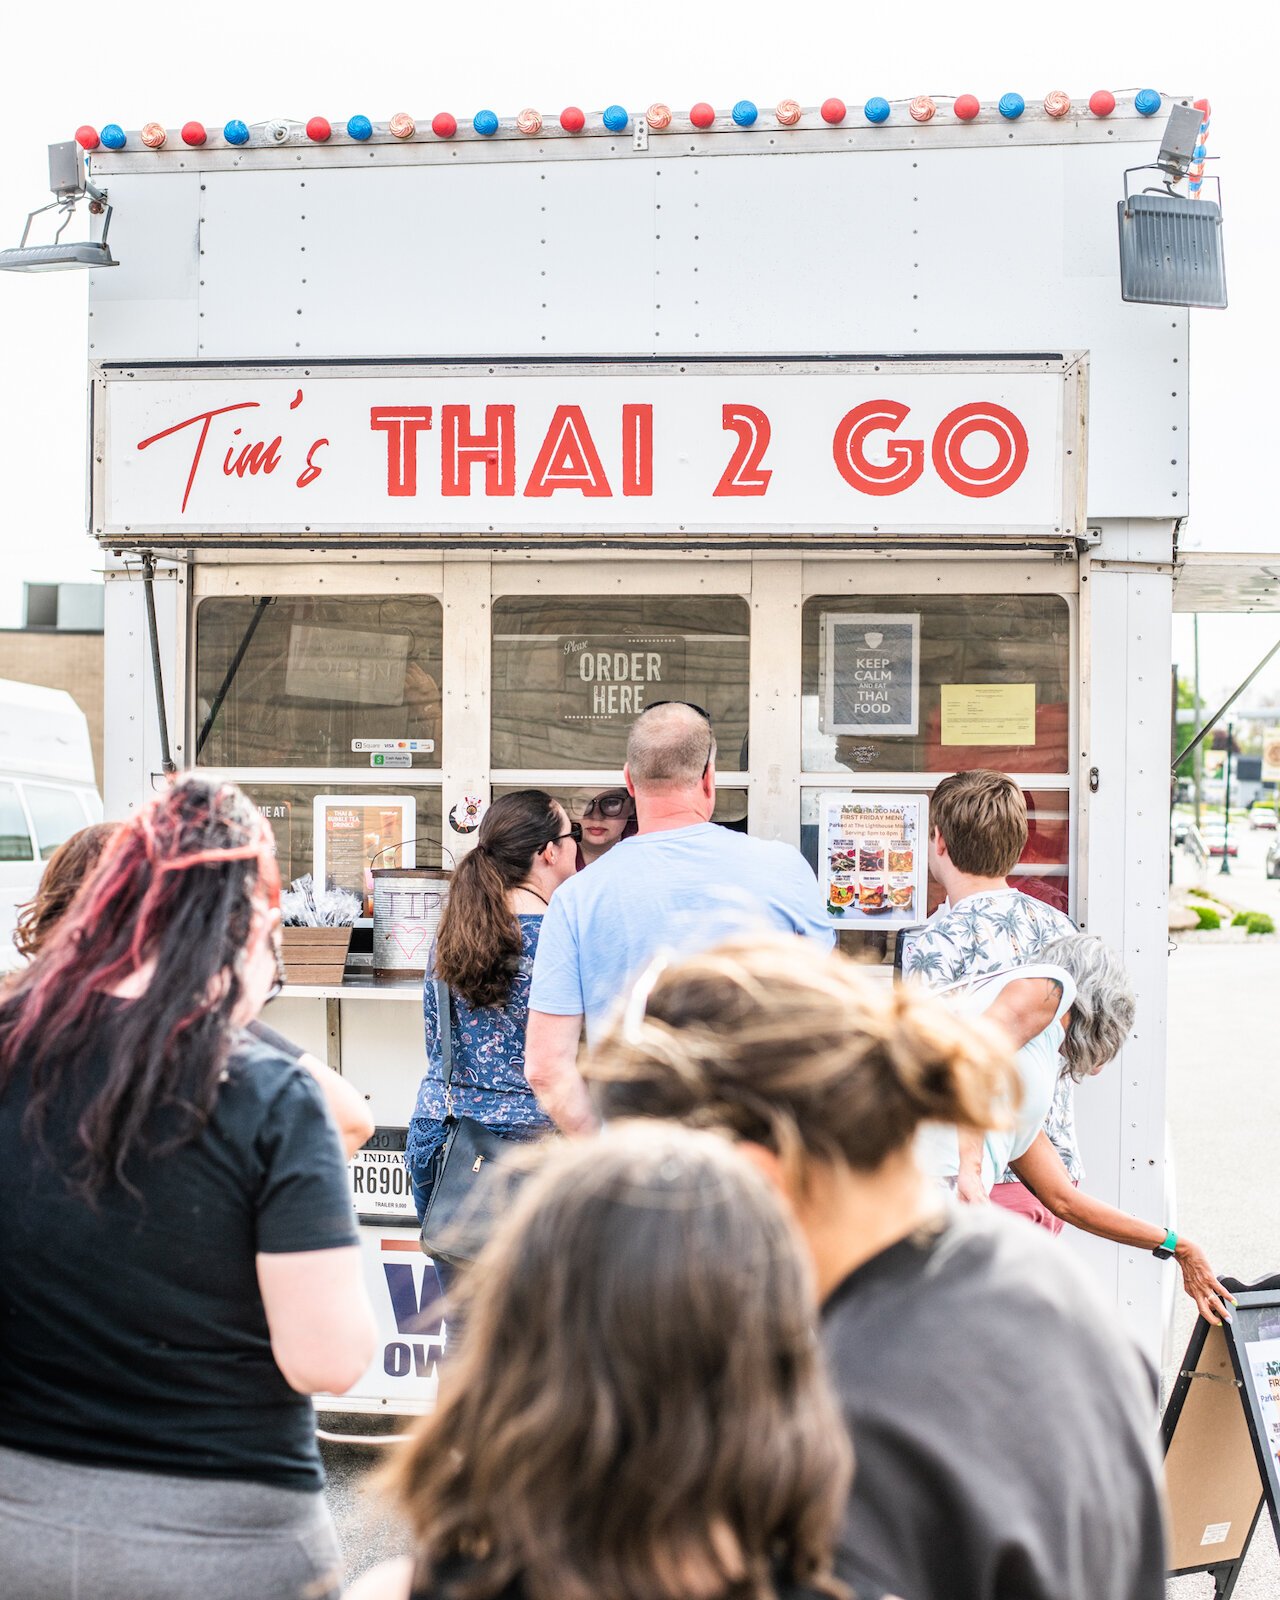 Customers wait in line to order from Tim's Thai 2 Go at First Friday.